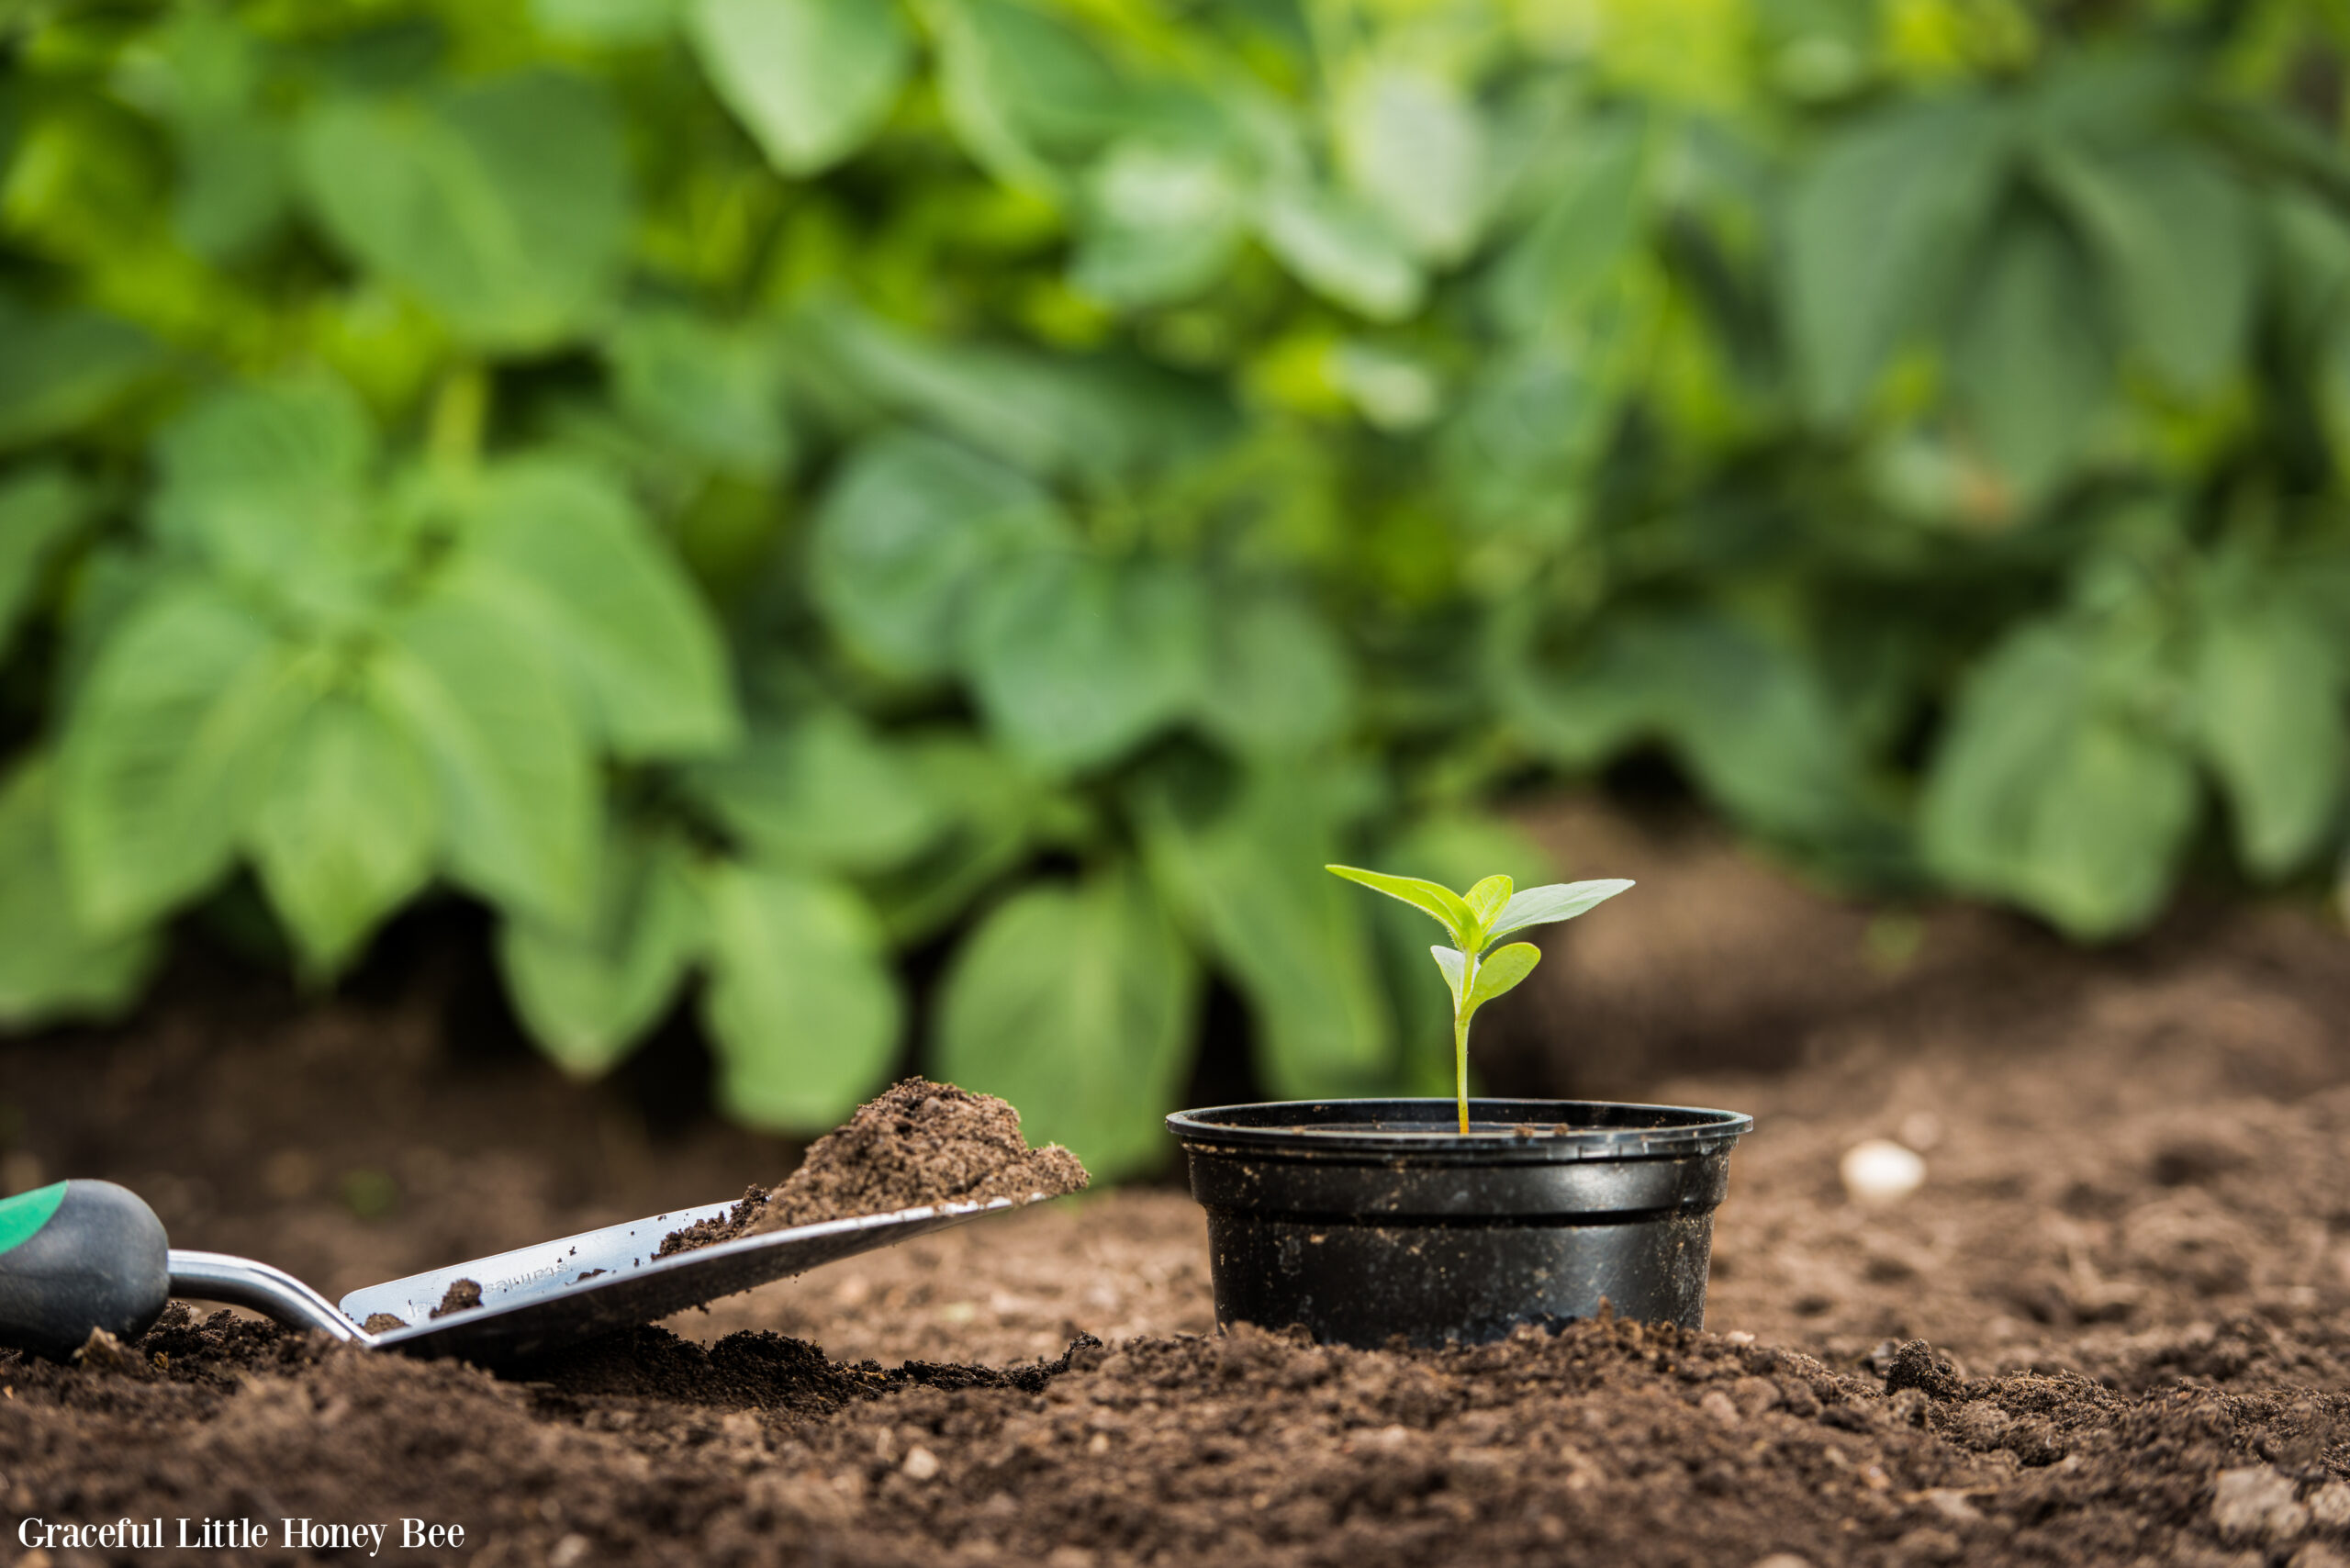 A small vegetable plant in a black plastic cup with a trowel sitting next to it in the dirt with green plants in the background.